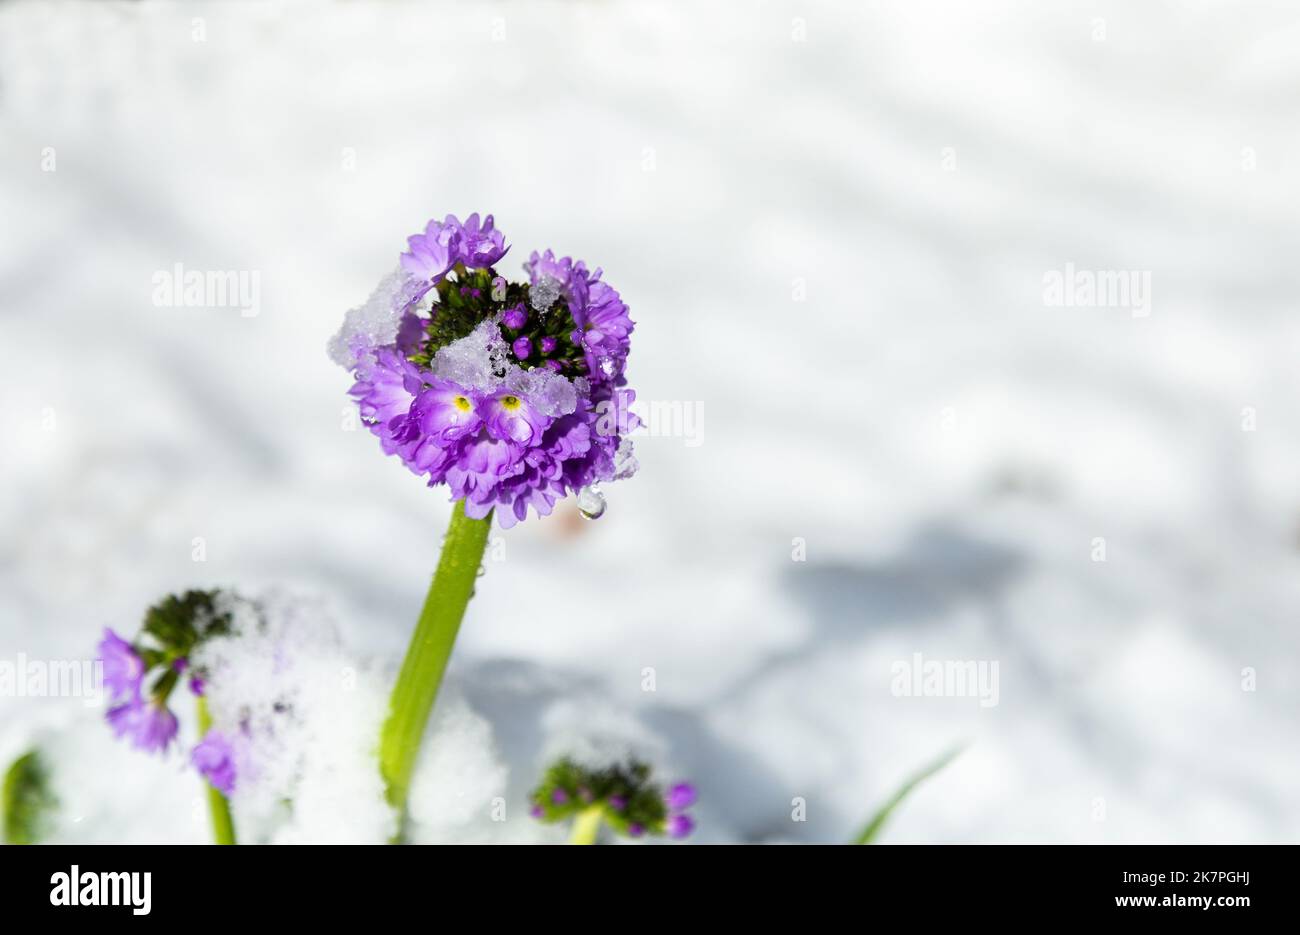 A Primula Denticulata growing through snow. (Drumstick Primrose). Spring flowering, this primrose was out when there was a spring snowfall. Stock Photo